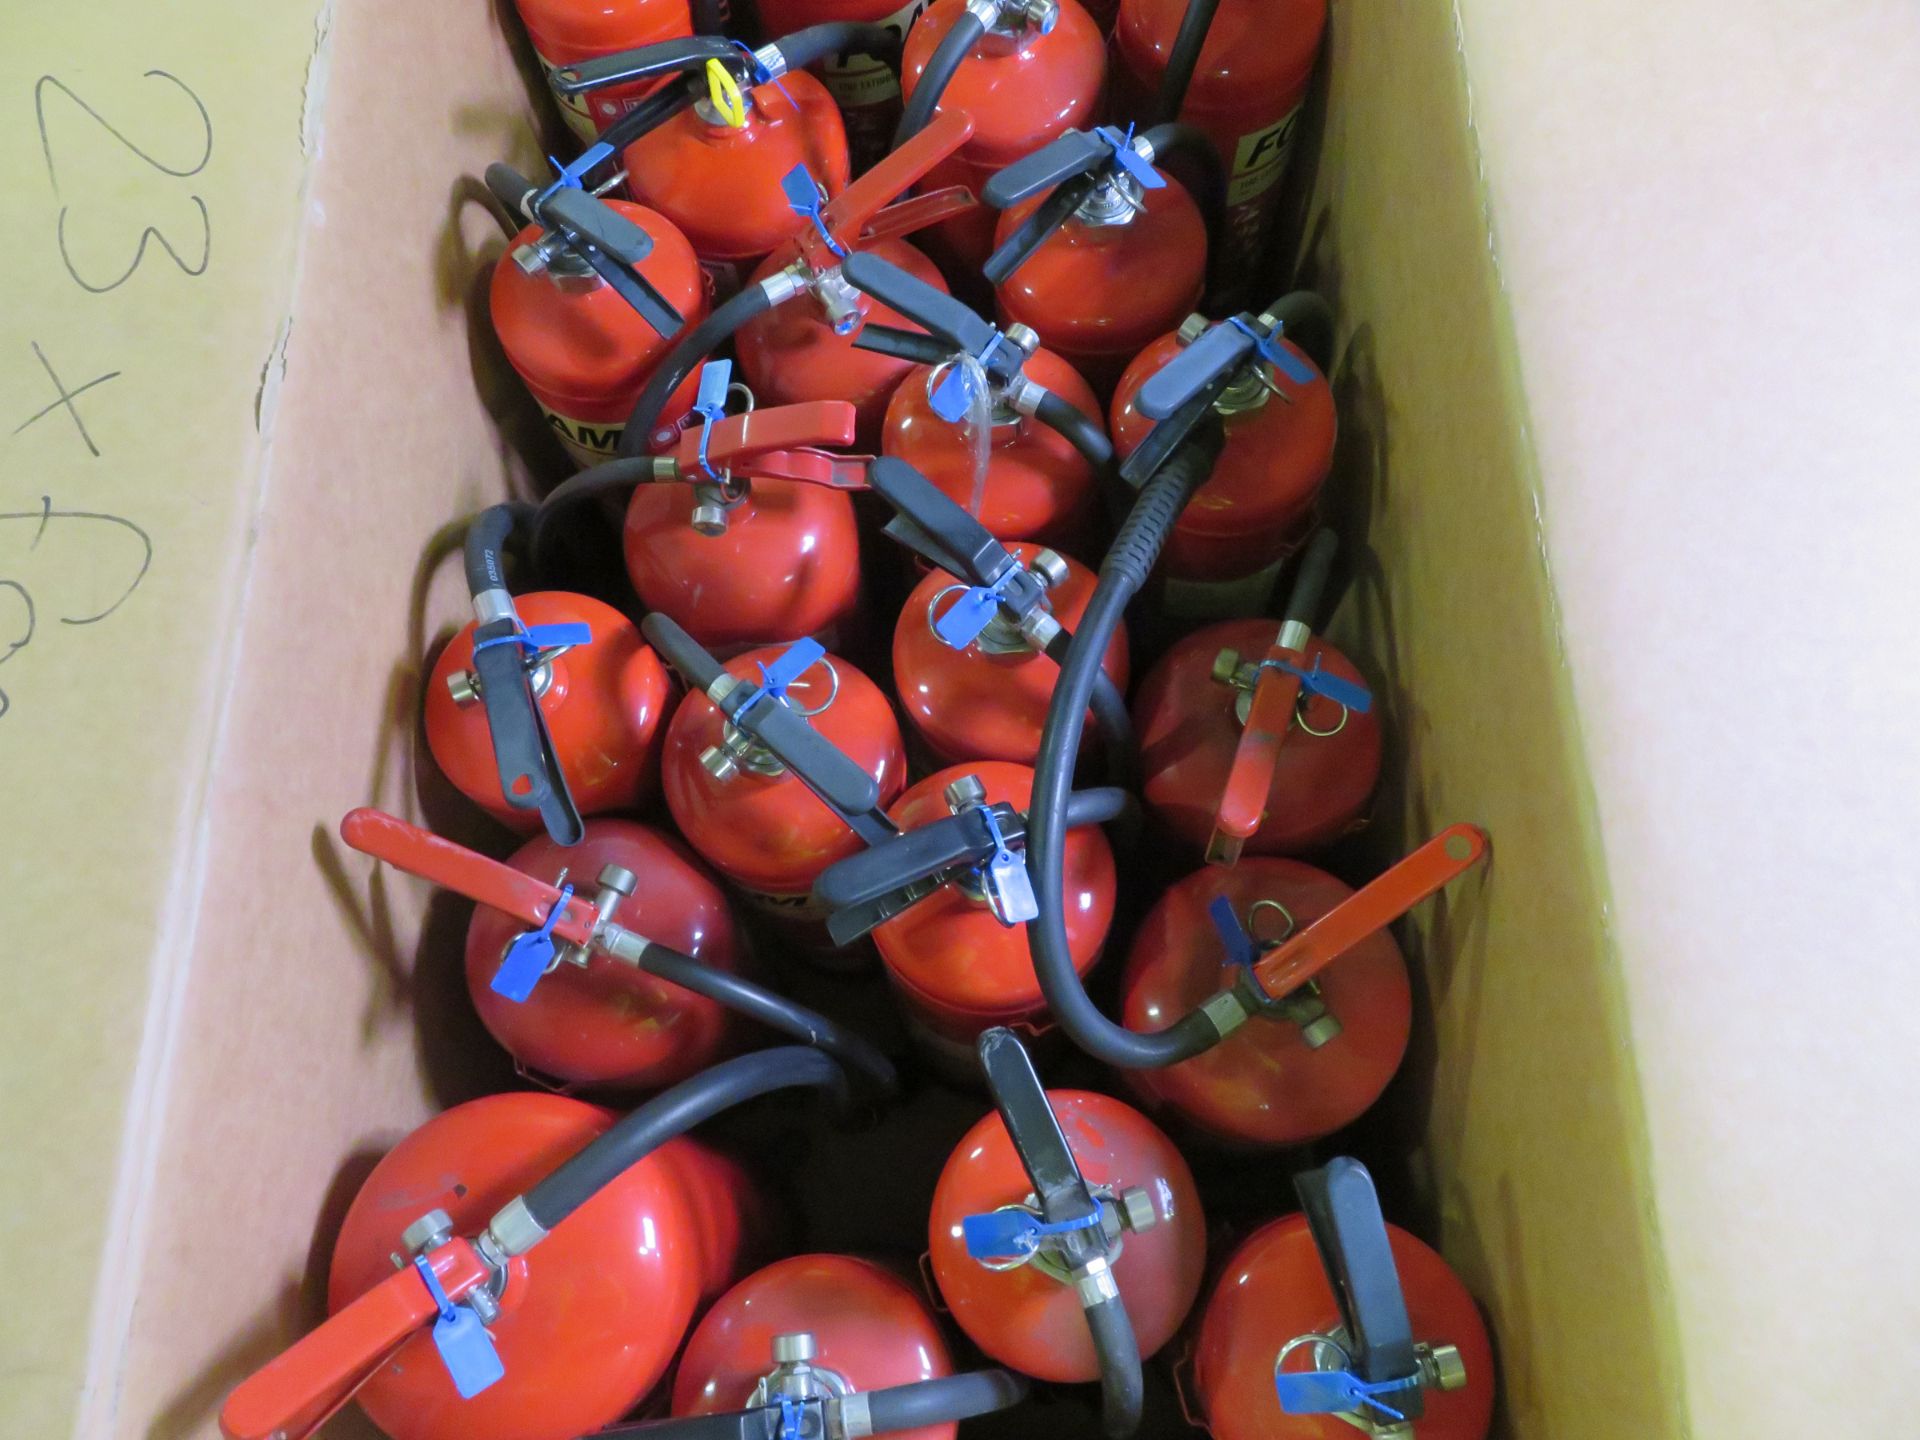 23 x Foam fire extinguishers - beyond expiration date, will need checking and retesting - Image 3 of 3